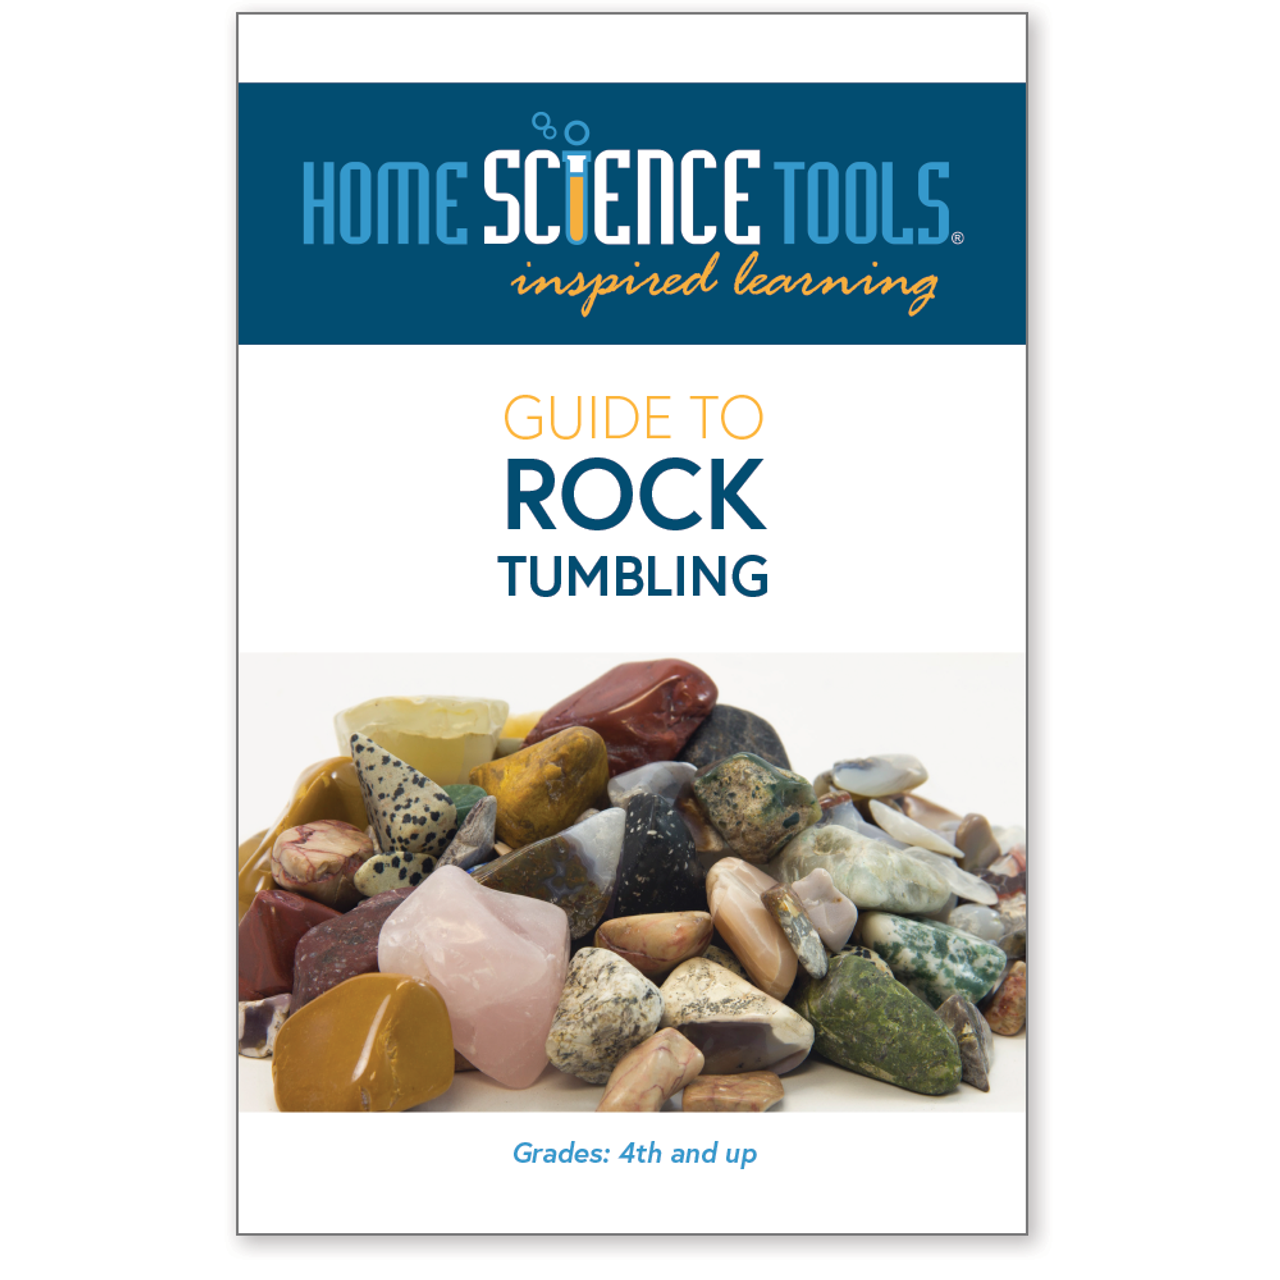 HST Rock Tumbling Guide & Instructions